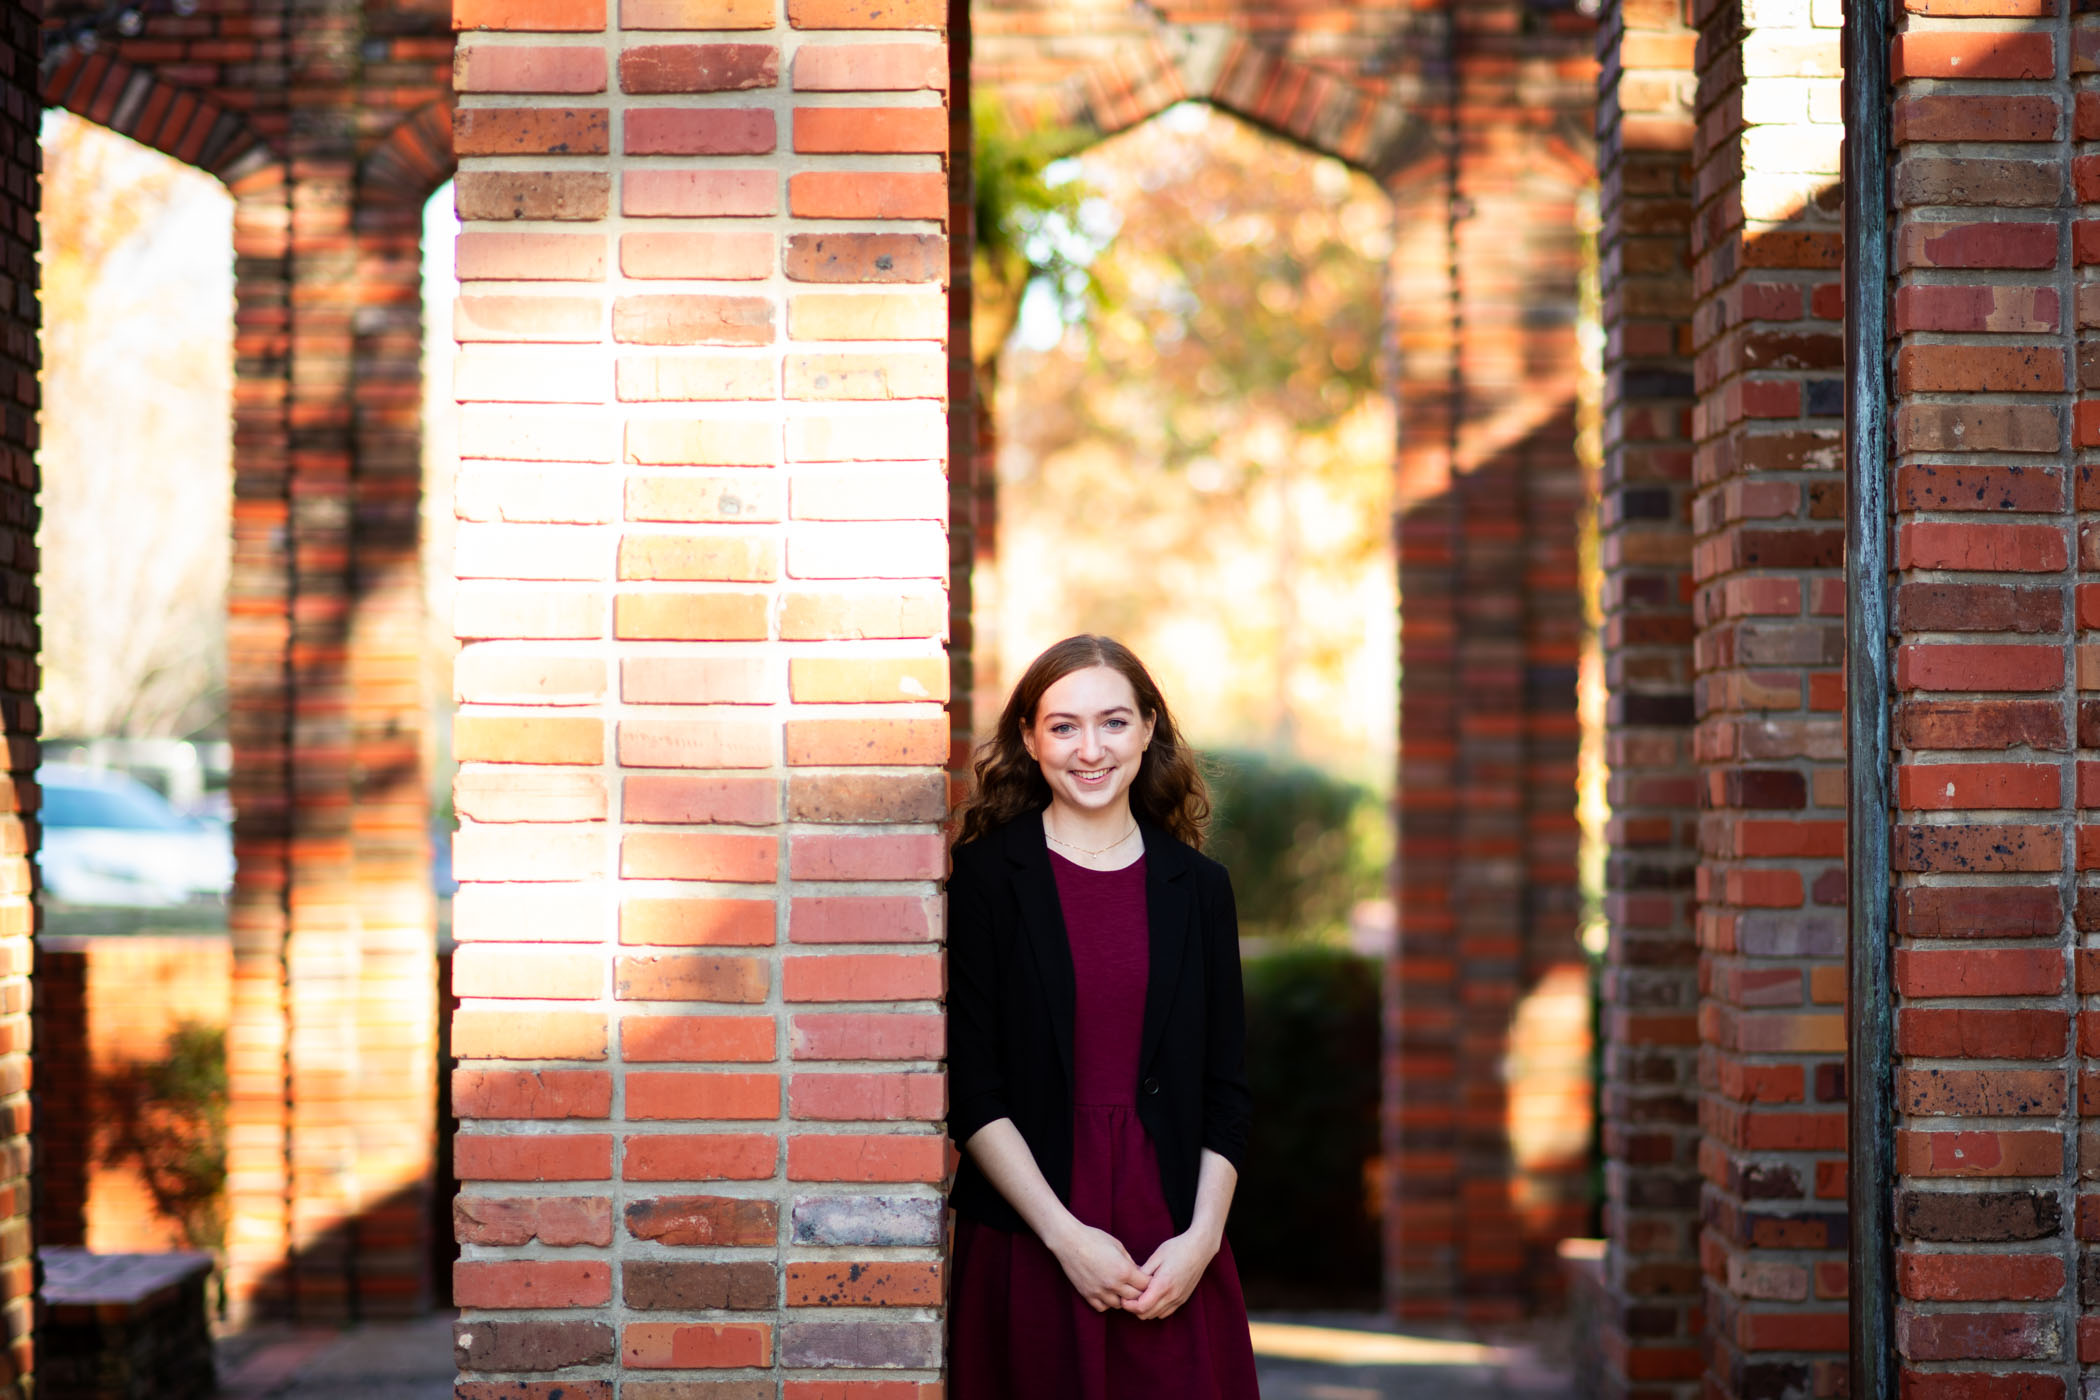 Madison Brode, a senior biological sciences major at Mississippi State, is the university’s first recipient of the Marshall Scholarship, a prestigious award annually providing a select 50 American students graduate-level study in the United Kingdom.